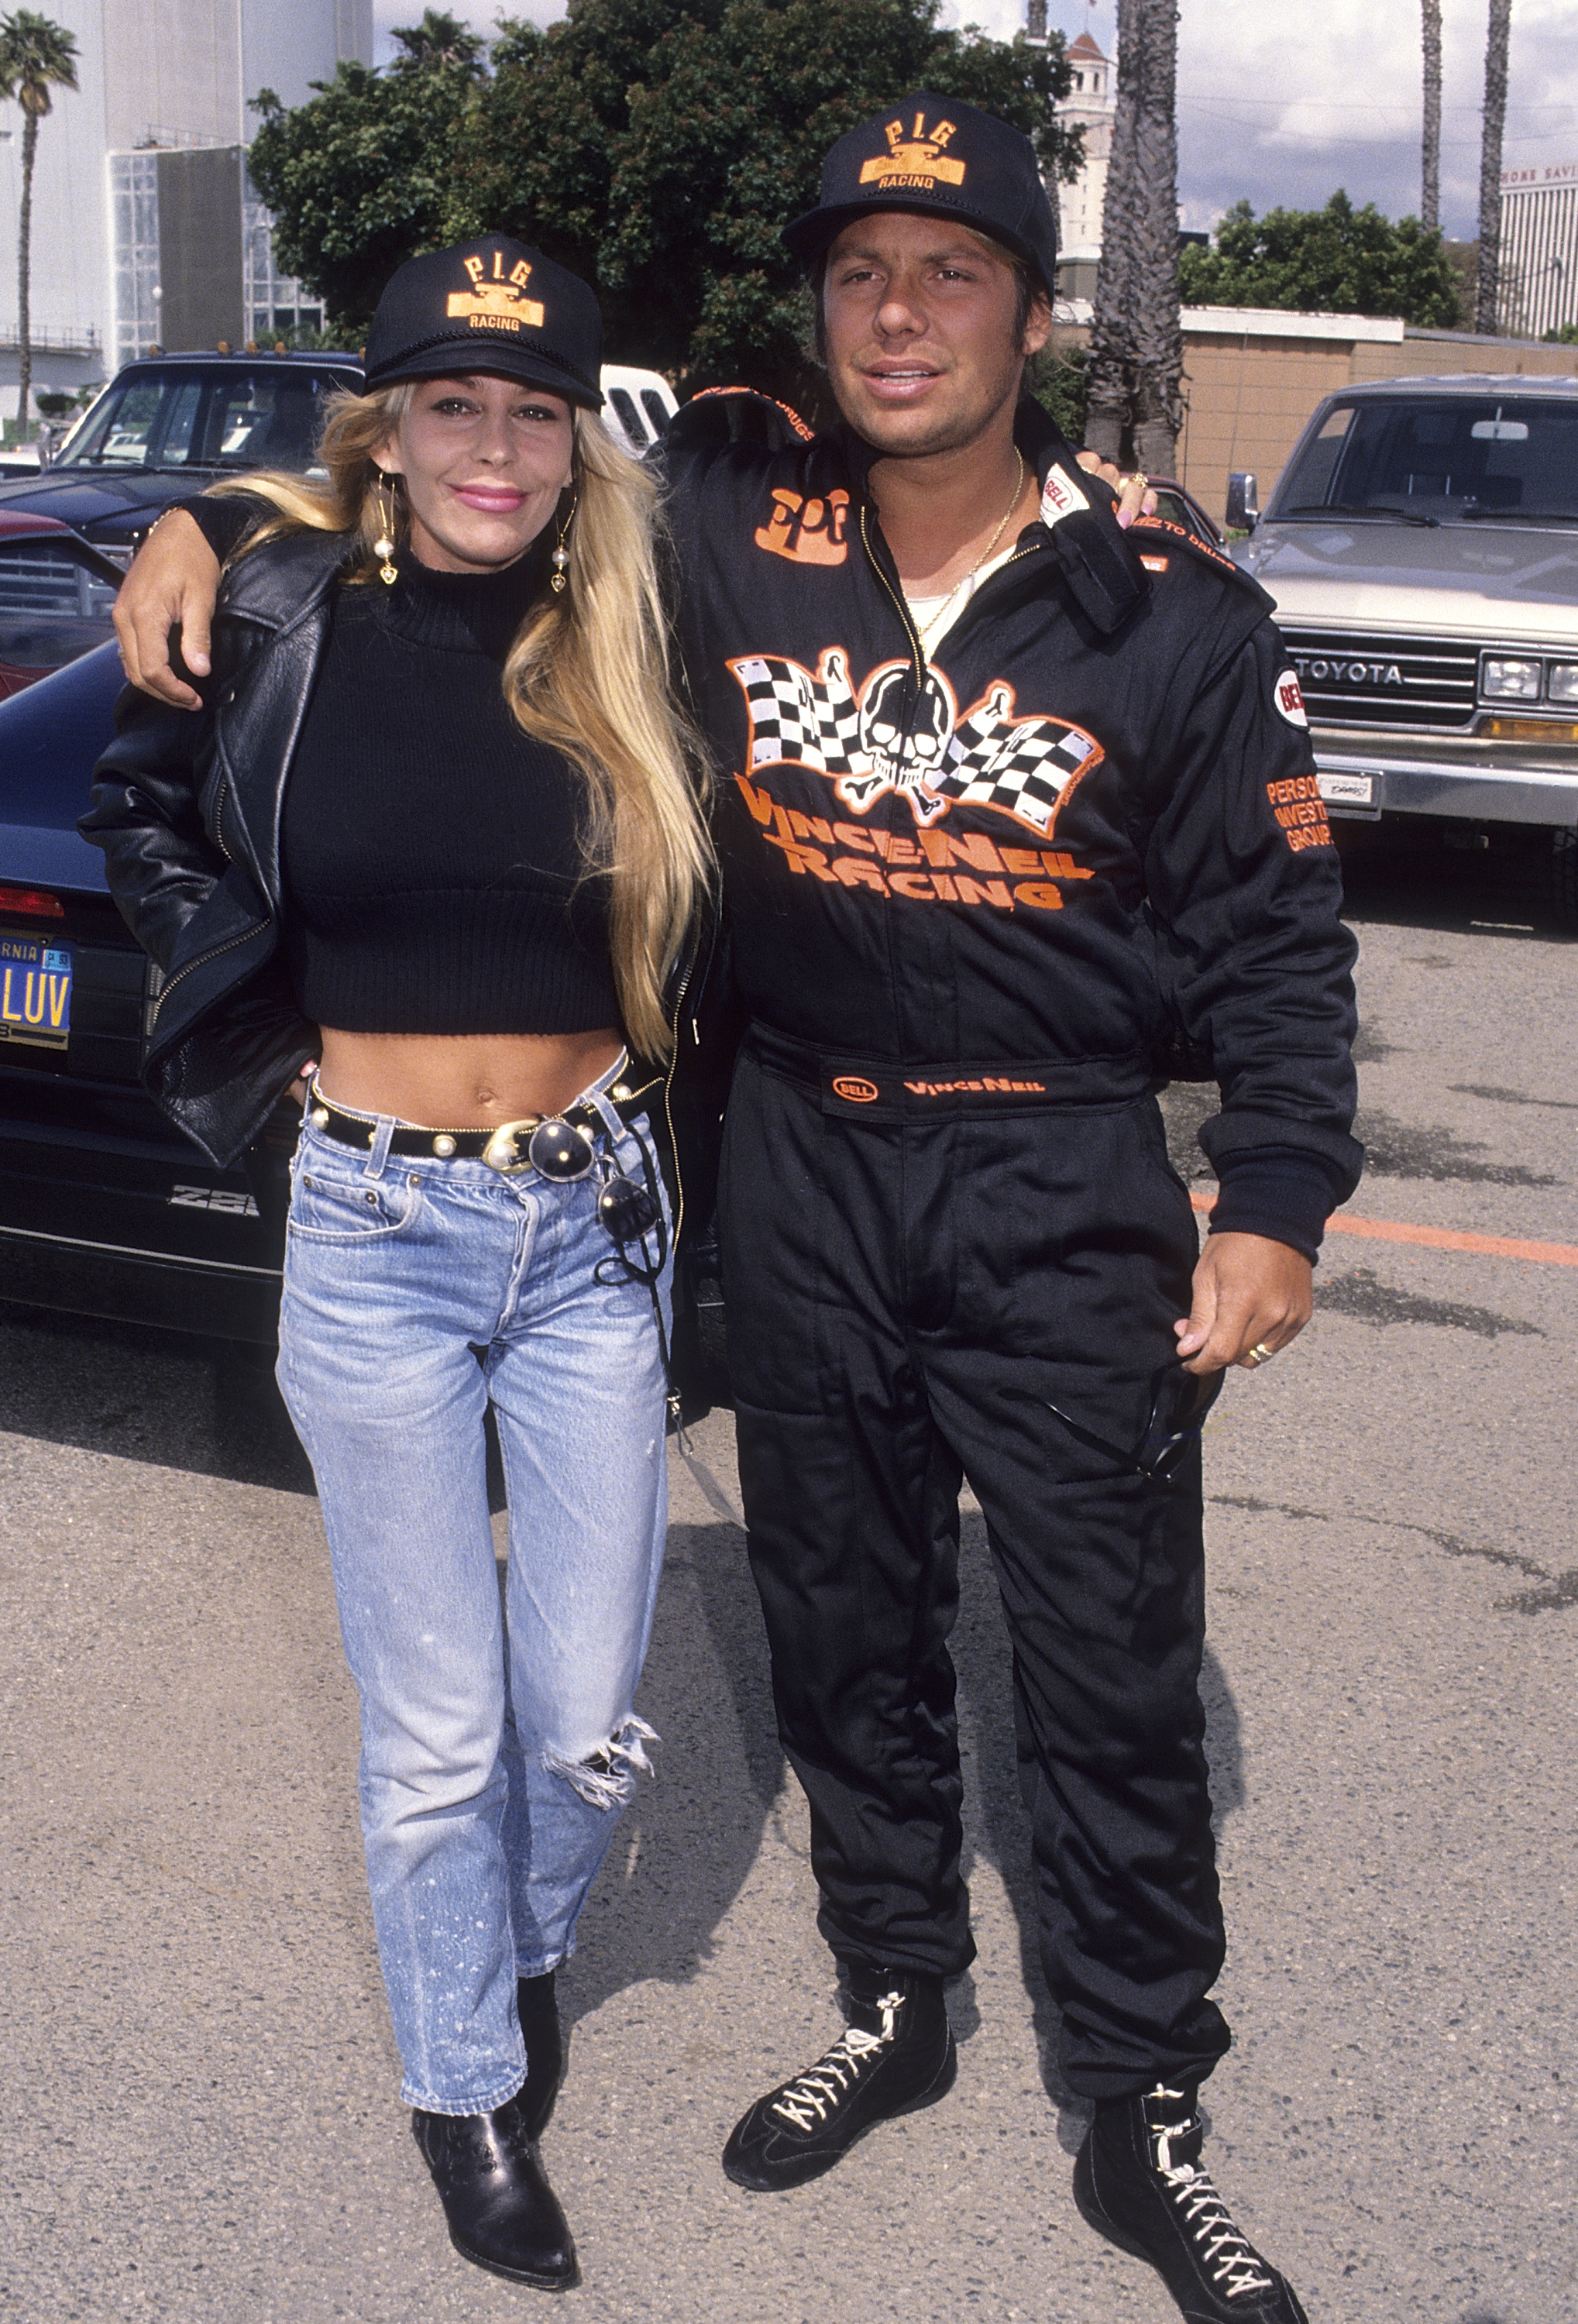 Sharise Ruddell and Vince Neil at the 16th Annual Toyota Pro/Celebrity Race - Press Day on March 31, 1992, in Long Beach, California | Source: Getty Images